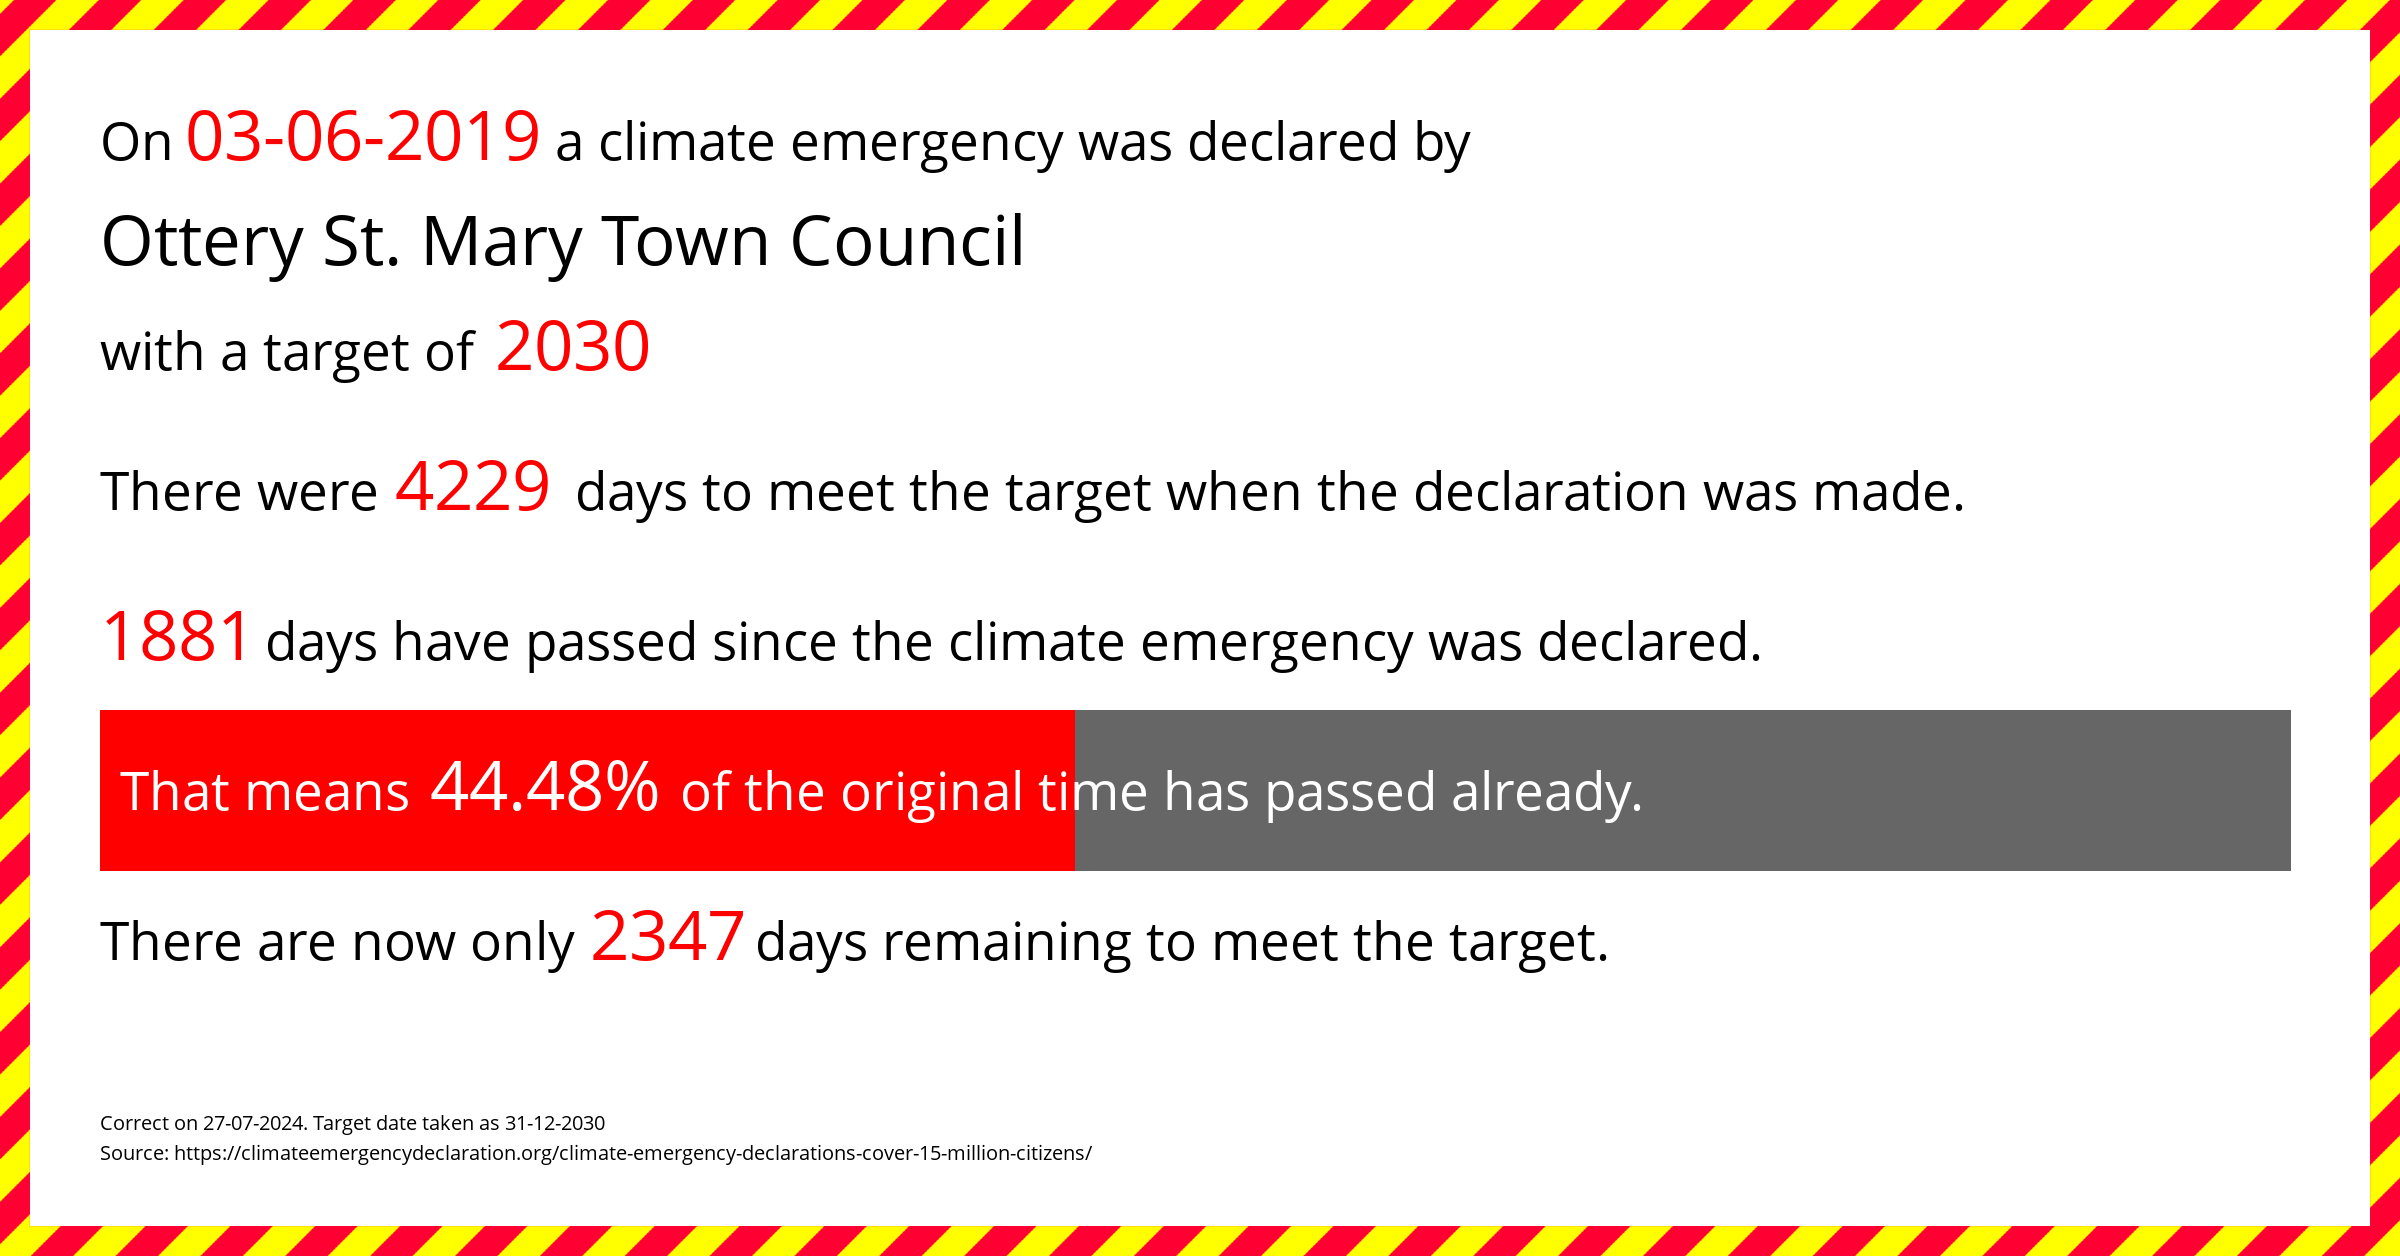 Ottery St. Mary Town Council declared a Climate emergency on Monday 3rd June 2019, with a target of 2030.